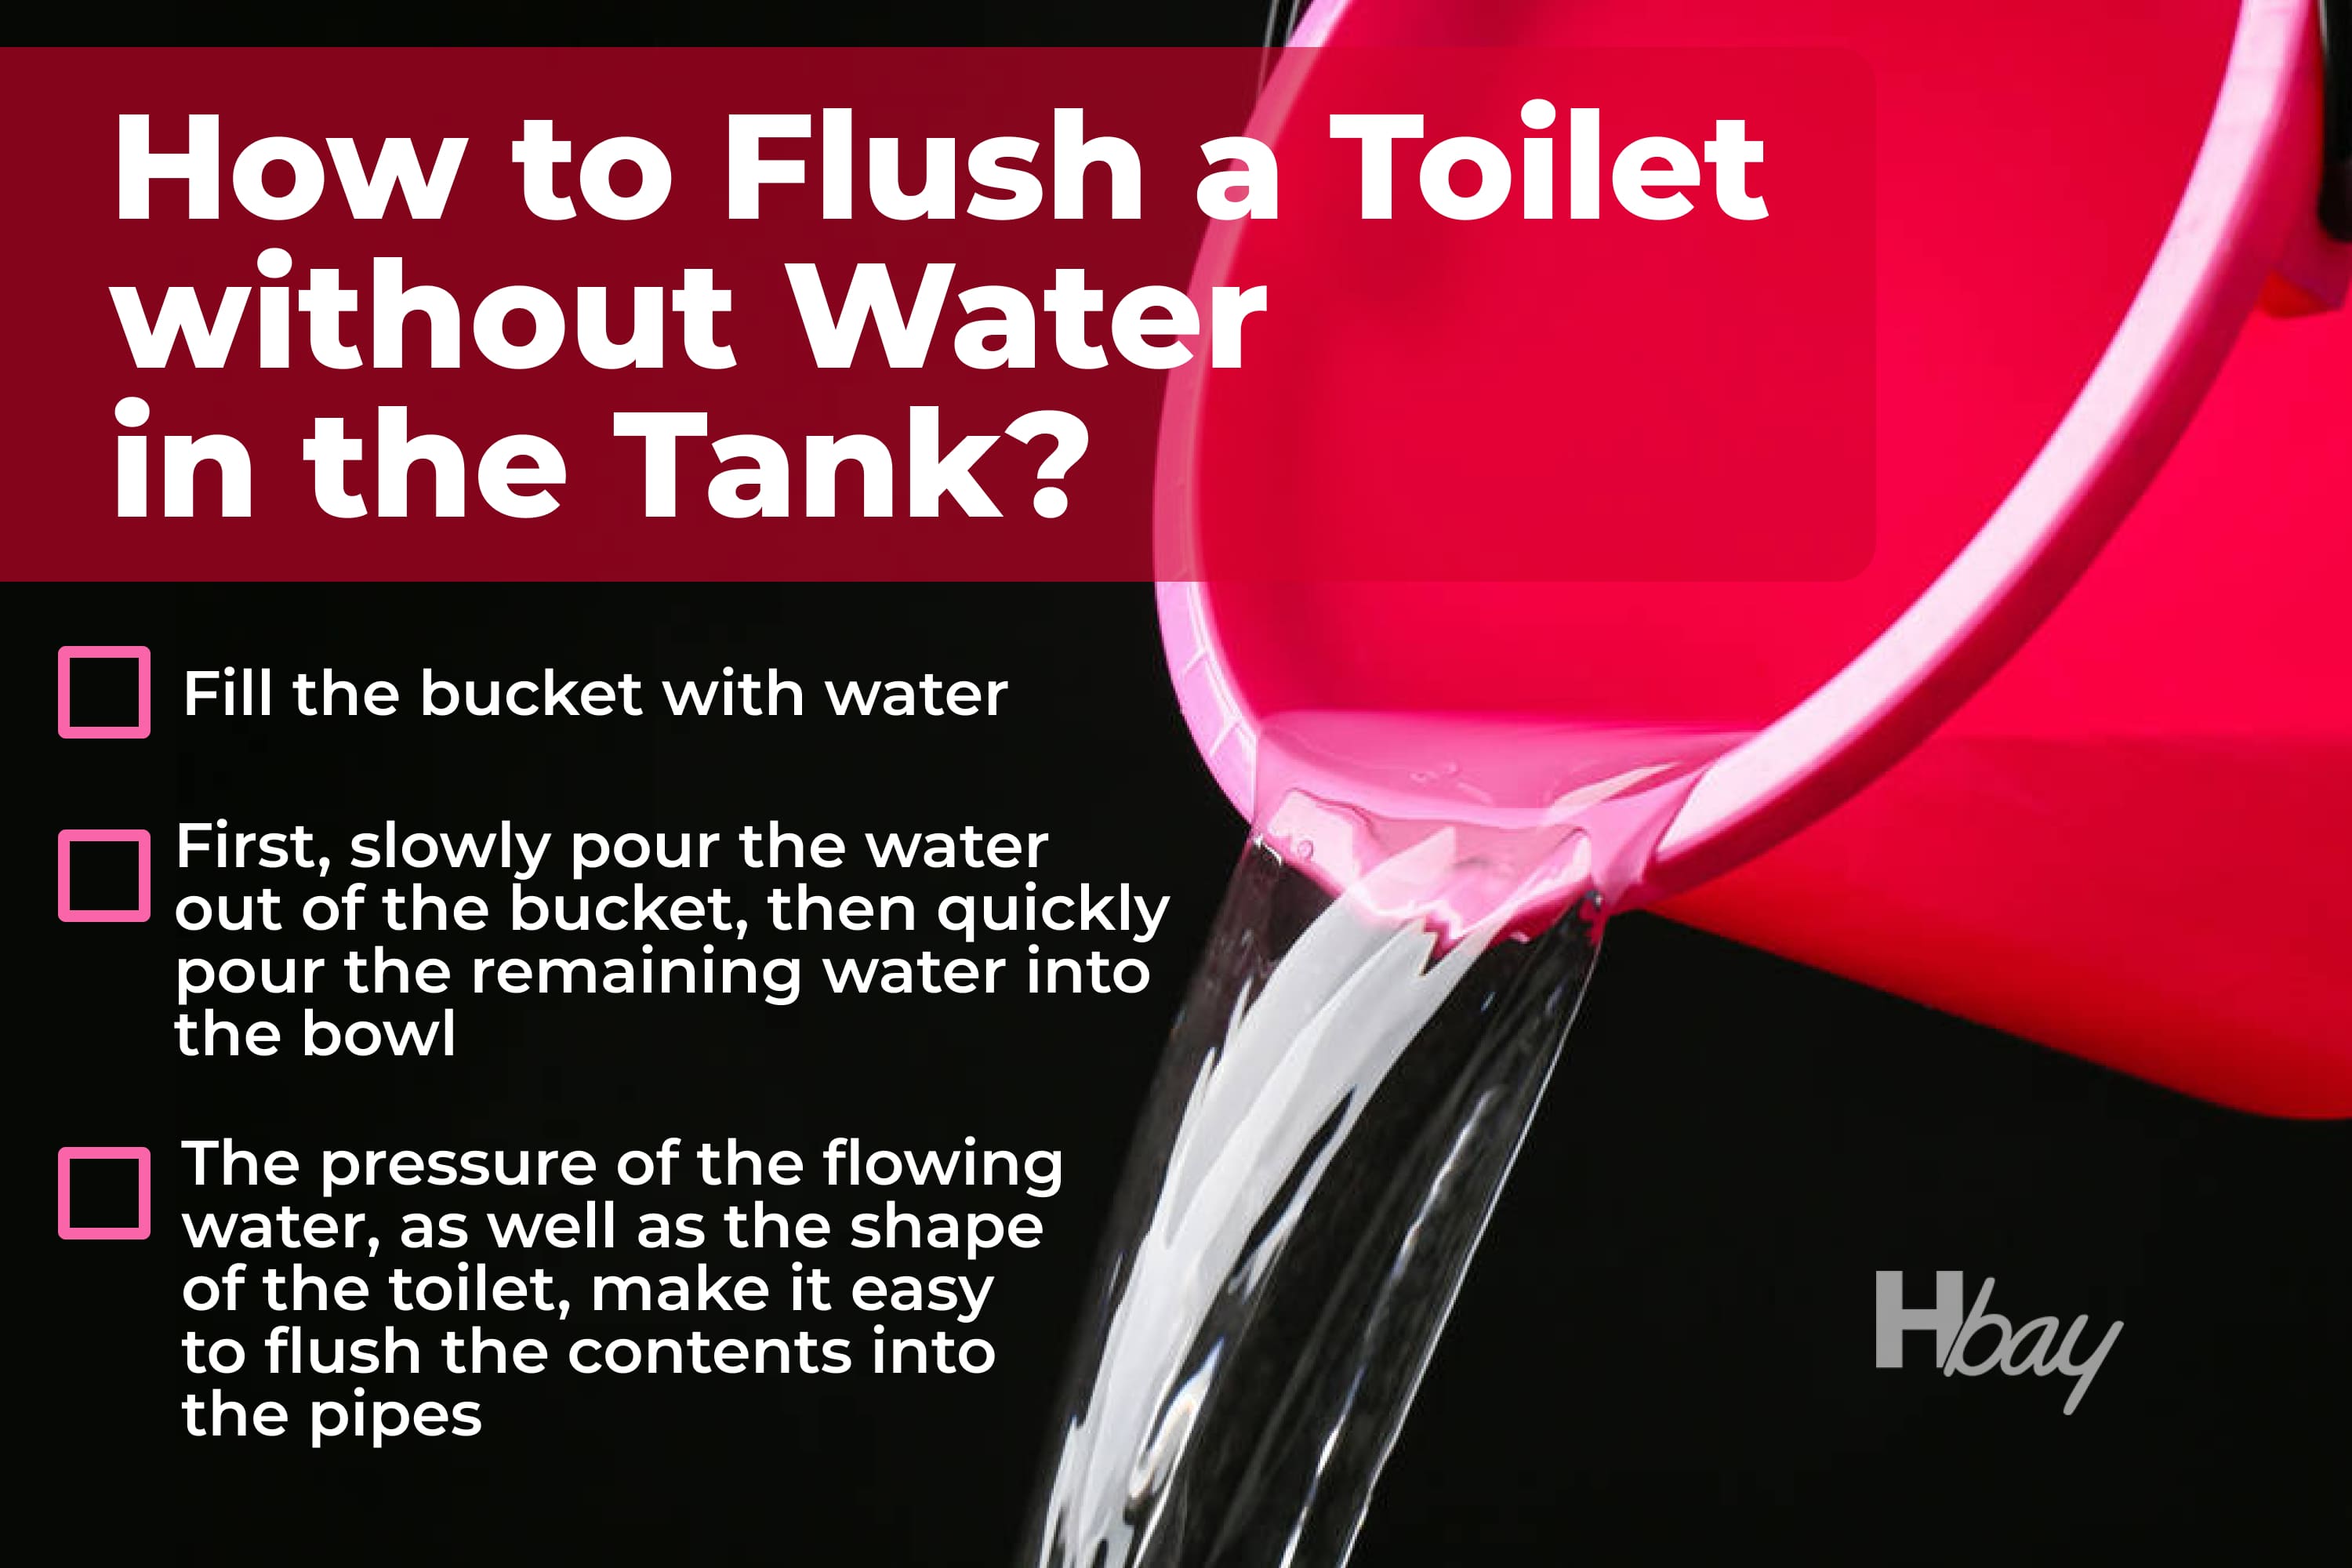 How to flush a toilet without water in the tank